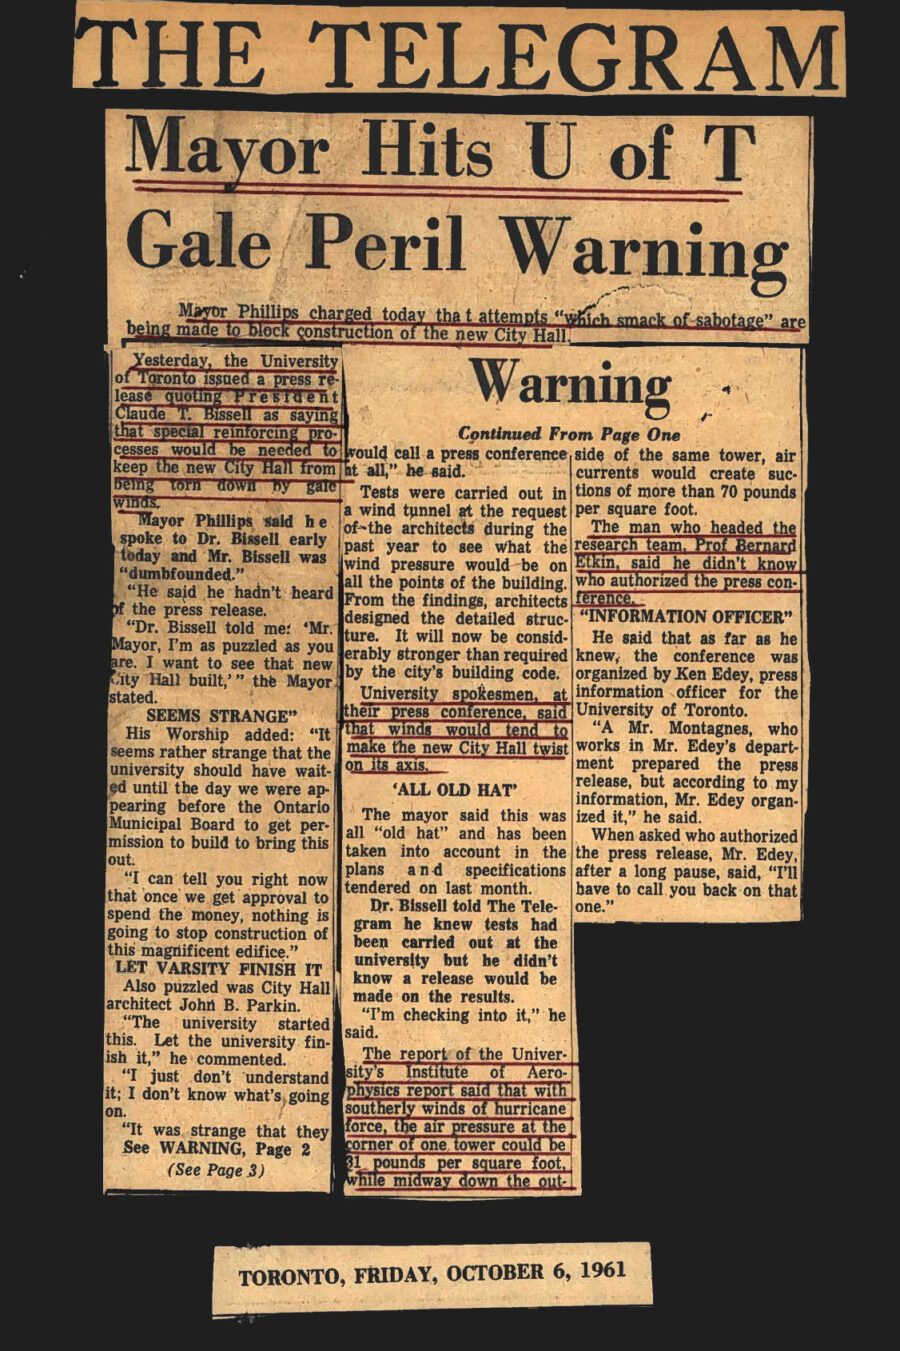 Newspaper clipping from The Telegram, October 6, 1961
Headline: Mayor Hits U of T Gale Peril Warning
Sub-headline: Mayor Phillips charged today that attempts which smack of sabotage are being made to block construction of the new City Hall

Yesterday, the University of Toronto issued a press release quoting President Claude T. Bissell as saying that special reinforcing processes would be needed to keep the new City Hall from being torn down by gale winds. Mayor Phillipps said he spoke to Doctor Bissell and Doctor Bissell was dumbfounded, denying knowledge of the press release. The Mayor found it strange that the press release came out the day he was meeting with the Ontario Municipal Board to get permission to build.

Tests were carried out in a wind tunnel at the request of the architects during the past year to see what the wind pressure would be on all the points of the building. From the findings, the architects designed the detailed structure. It will now be considerably stronger than required by the city’s building code.

University spokesmen at their press conference said that winds would tend to make the new City Hall twist on its axis. The man who headed the research team, Professor Bernard Etkin, said he didn’t know who authorized the press conference. Etkin believed Ken Edey, the press information officer for the University of Toronto, organized the release. When asked who had authorized the press release, Mister Edey, after a long pause, said “I’ll have to call you back on that one.